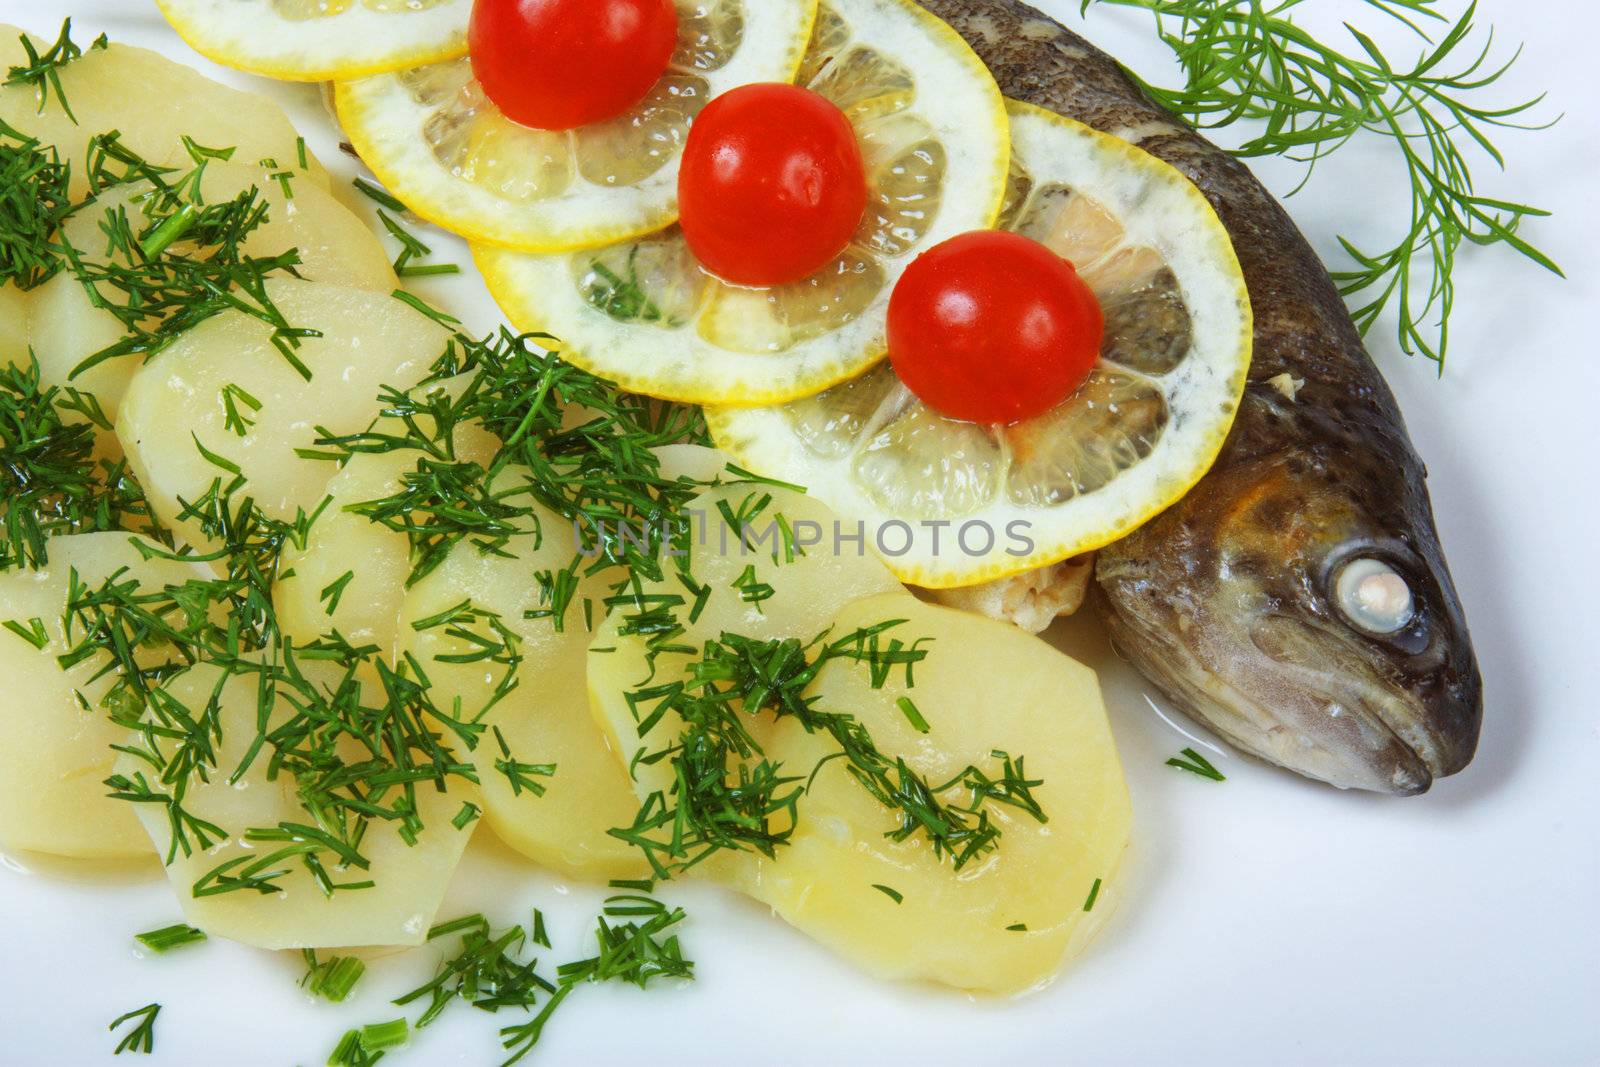 Fish with potatoes and spices  by oleg_zhukov